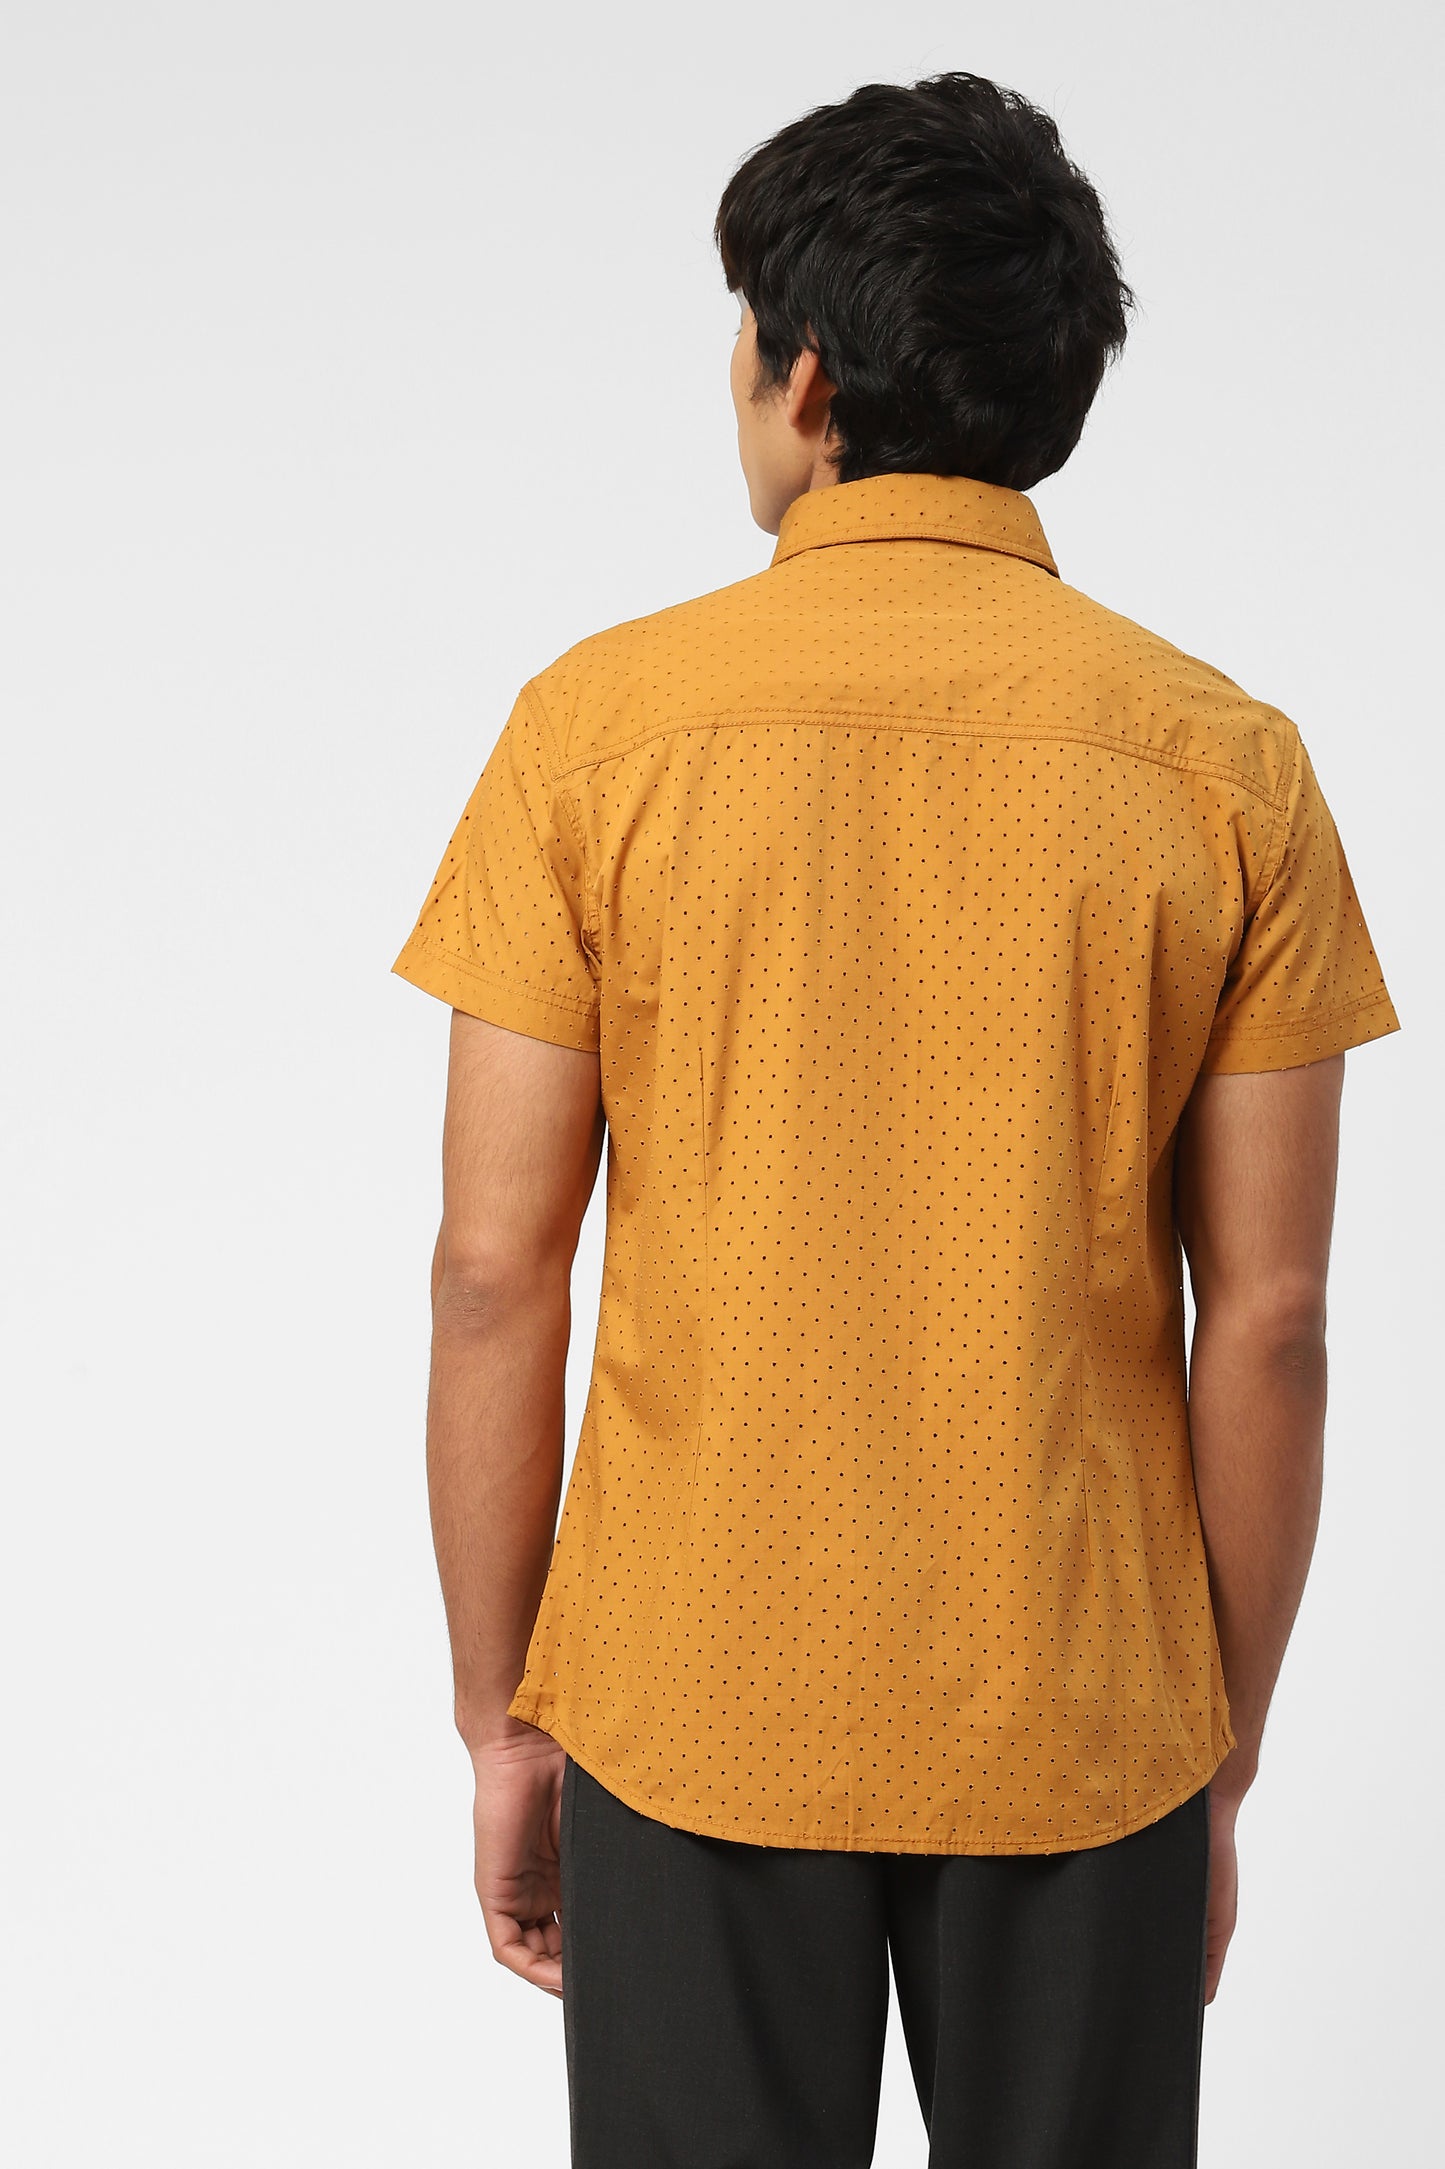 Mens Perforated Shirt with short sleeves